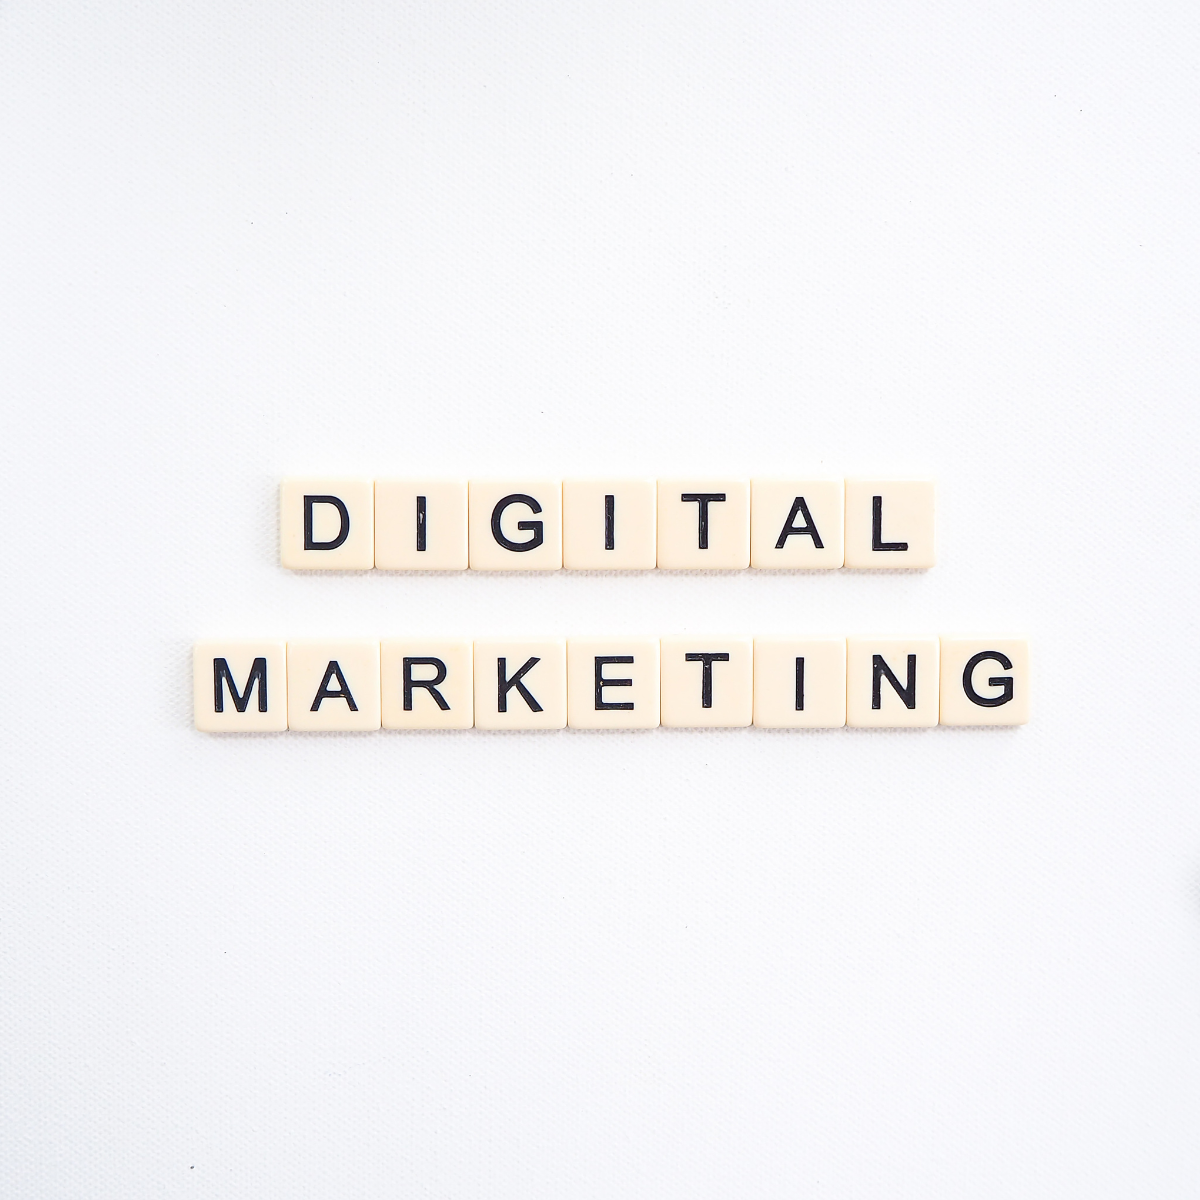 A smooth approach to digital marketing